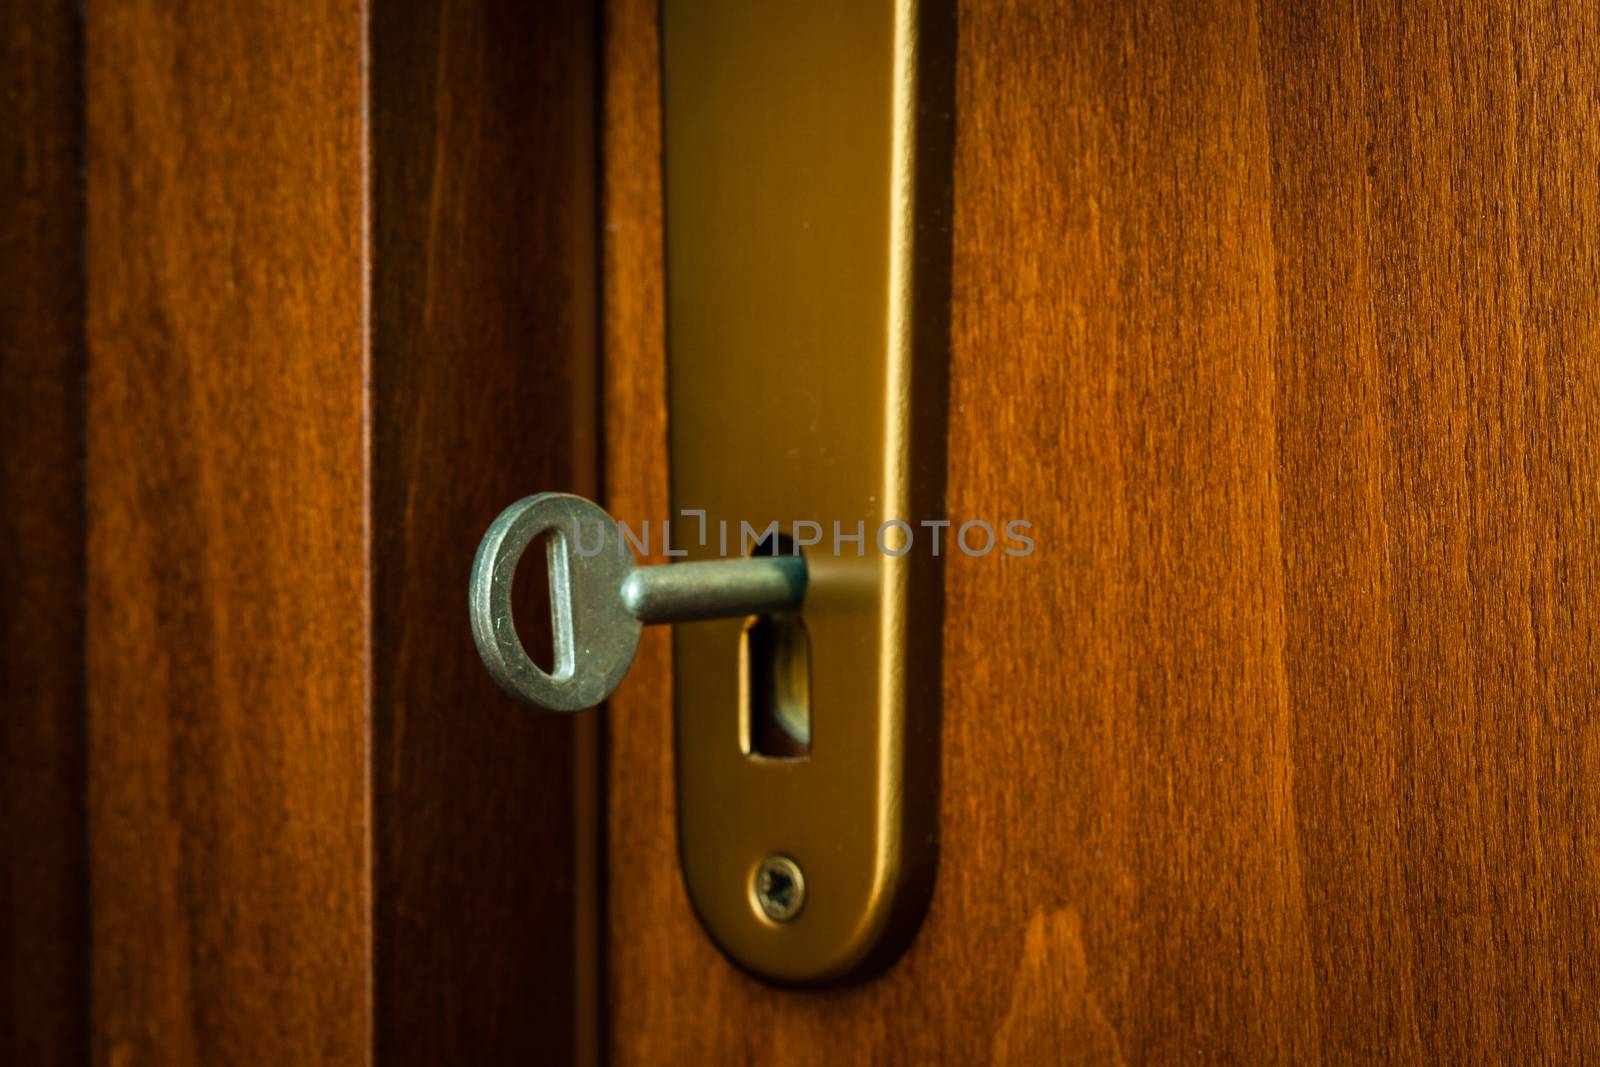 close-up key in keyhole of wooden door